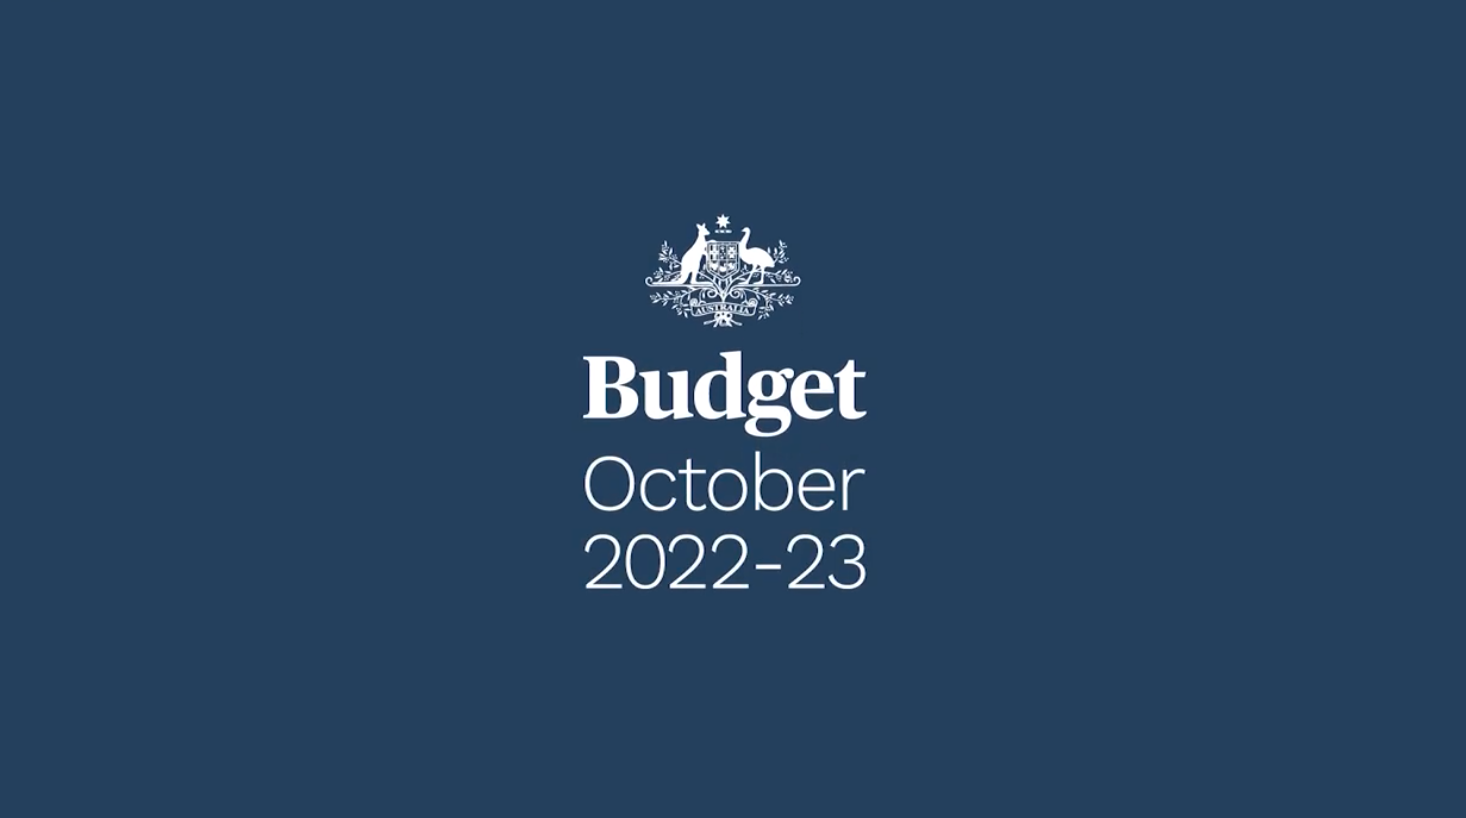 budget-22-23-cover-2 | RSL LifeCare - provide care and service to war veterans, retirement villages and accommodation, aged care services and assisted living